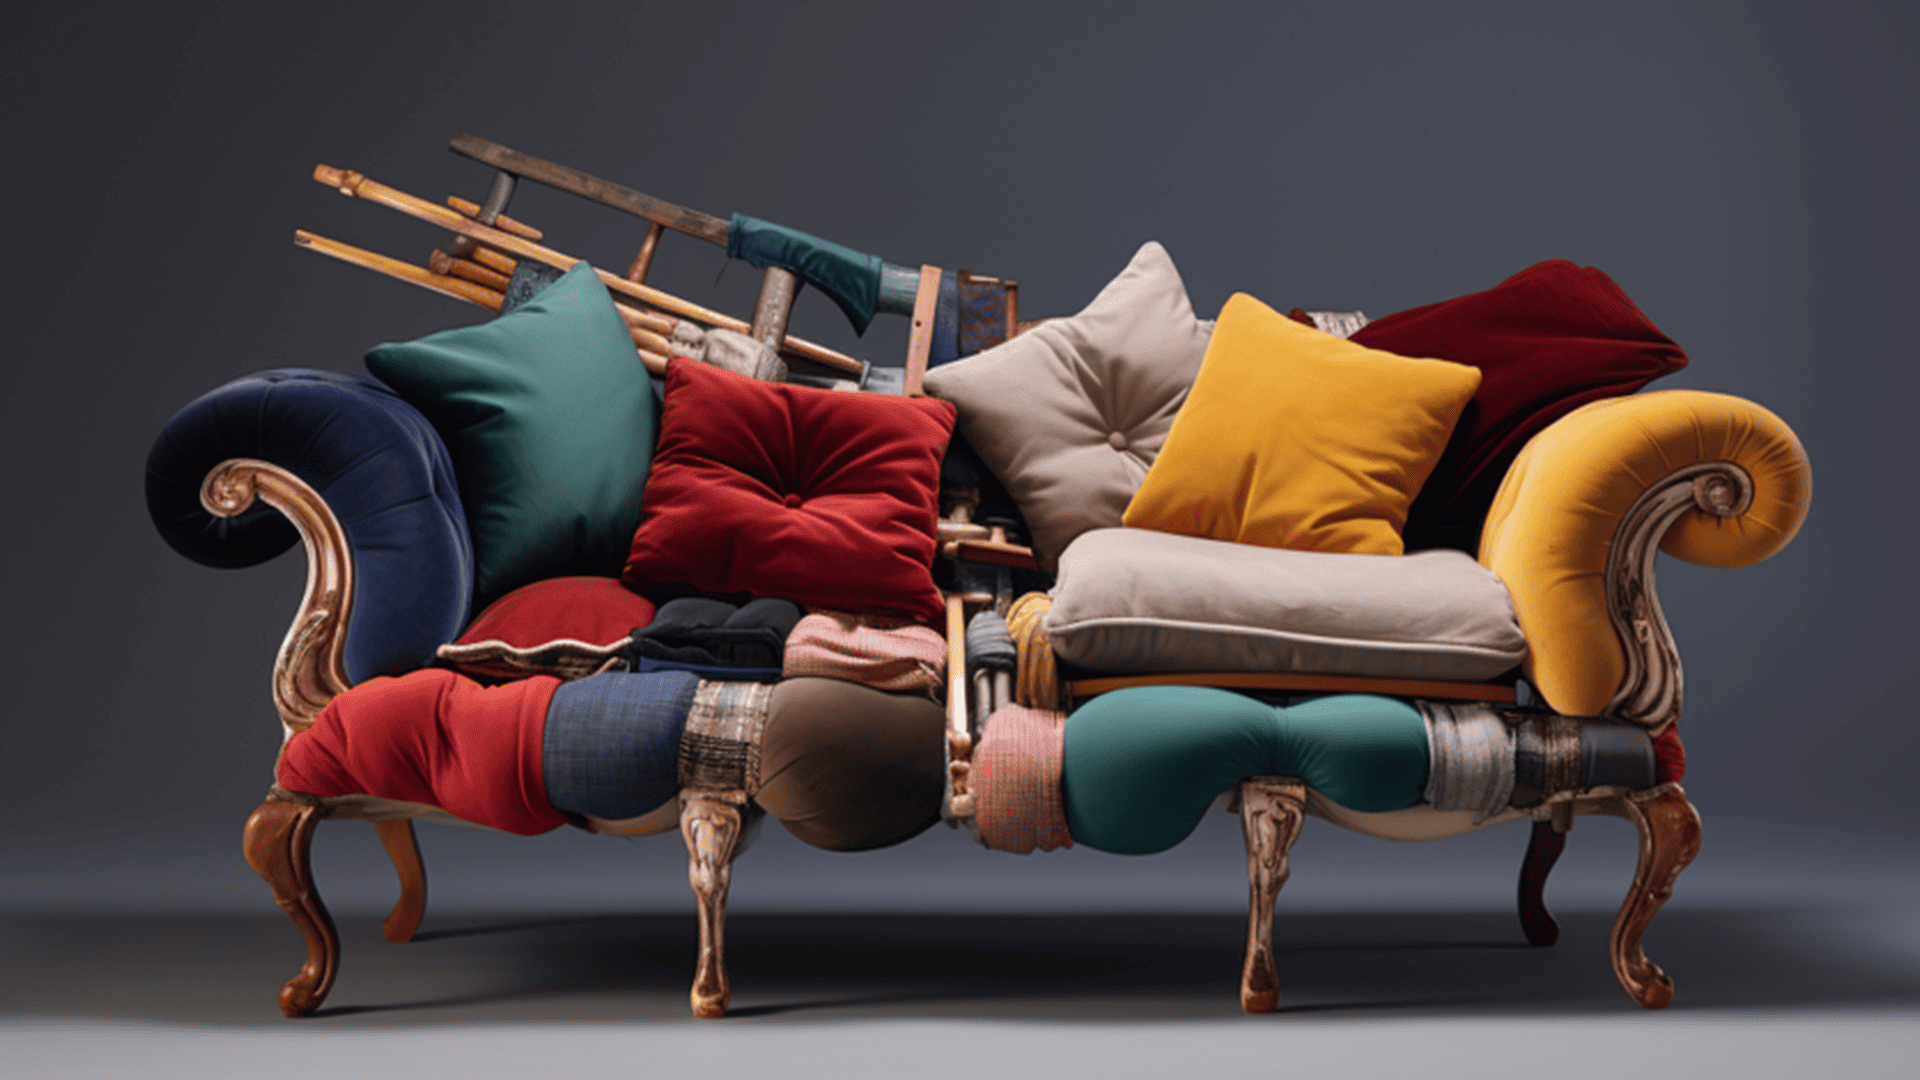 An imaginary couch made of many different styles and fabrics to represent the virtually infinite options out there